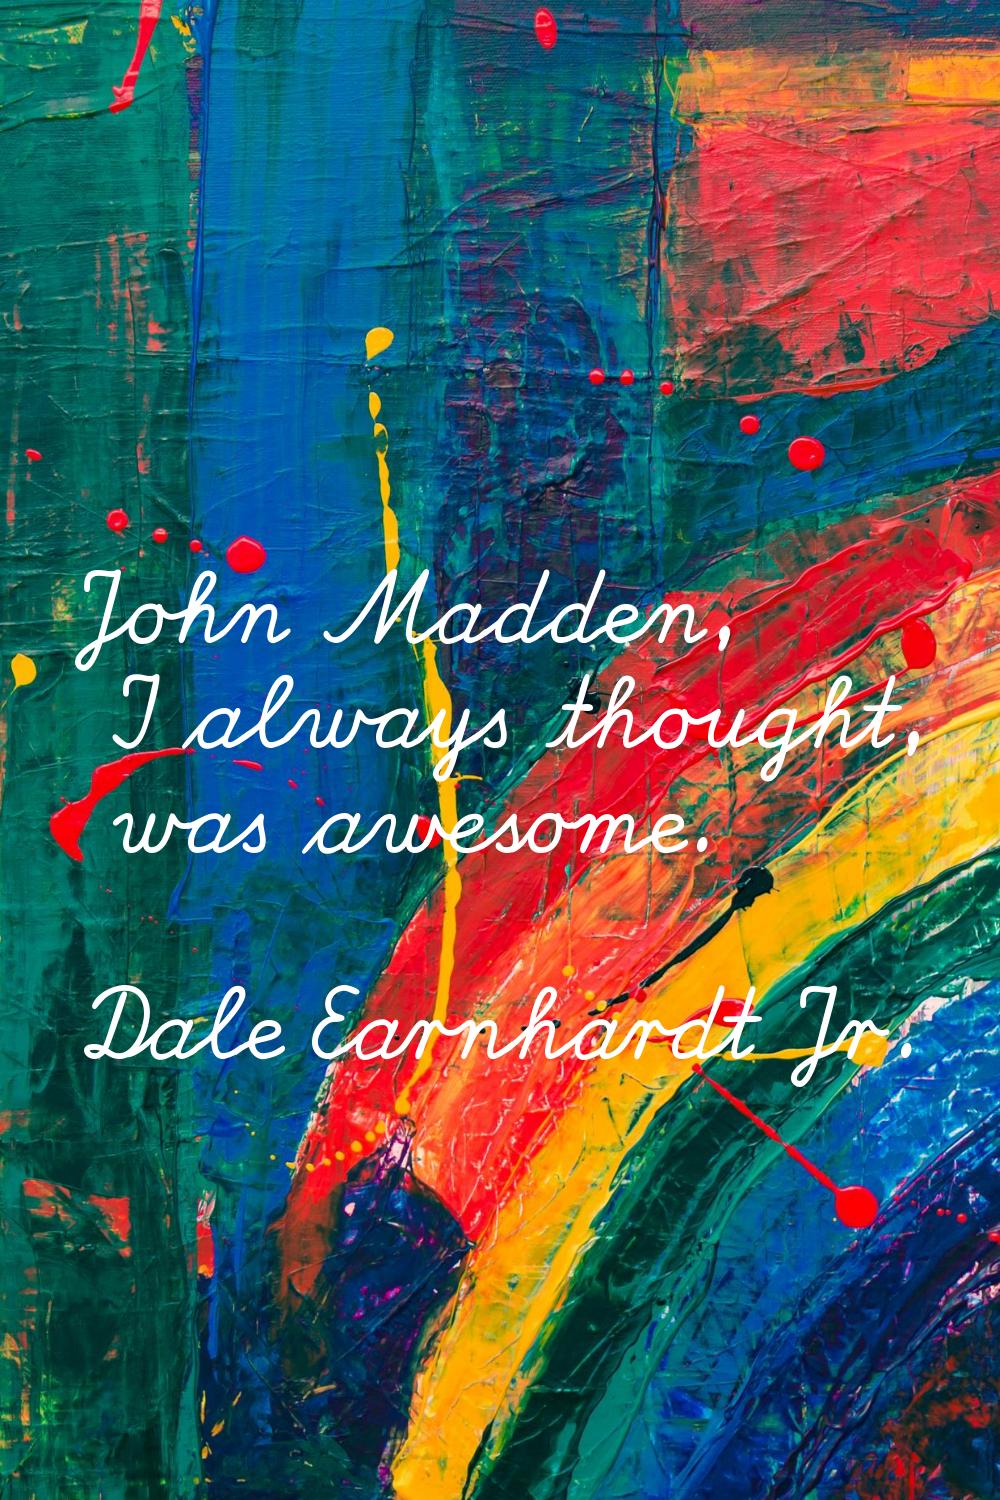 John Madden, I always thought, was awesome.